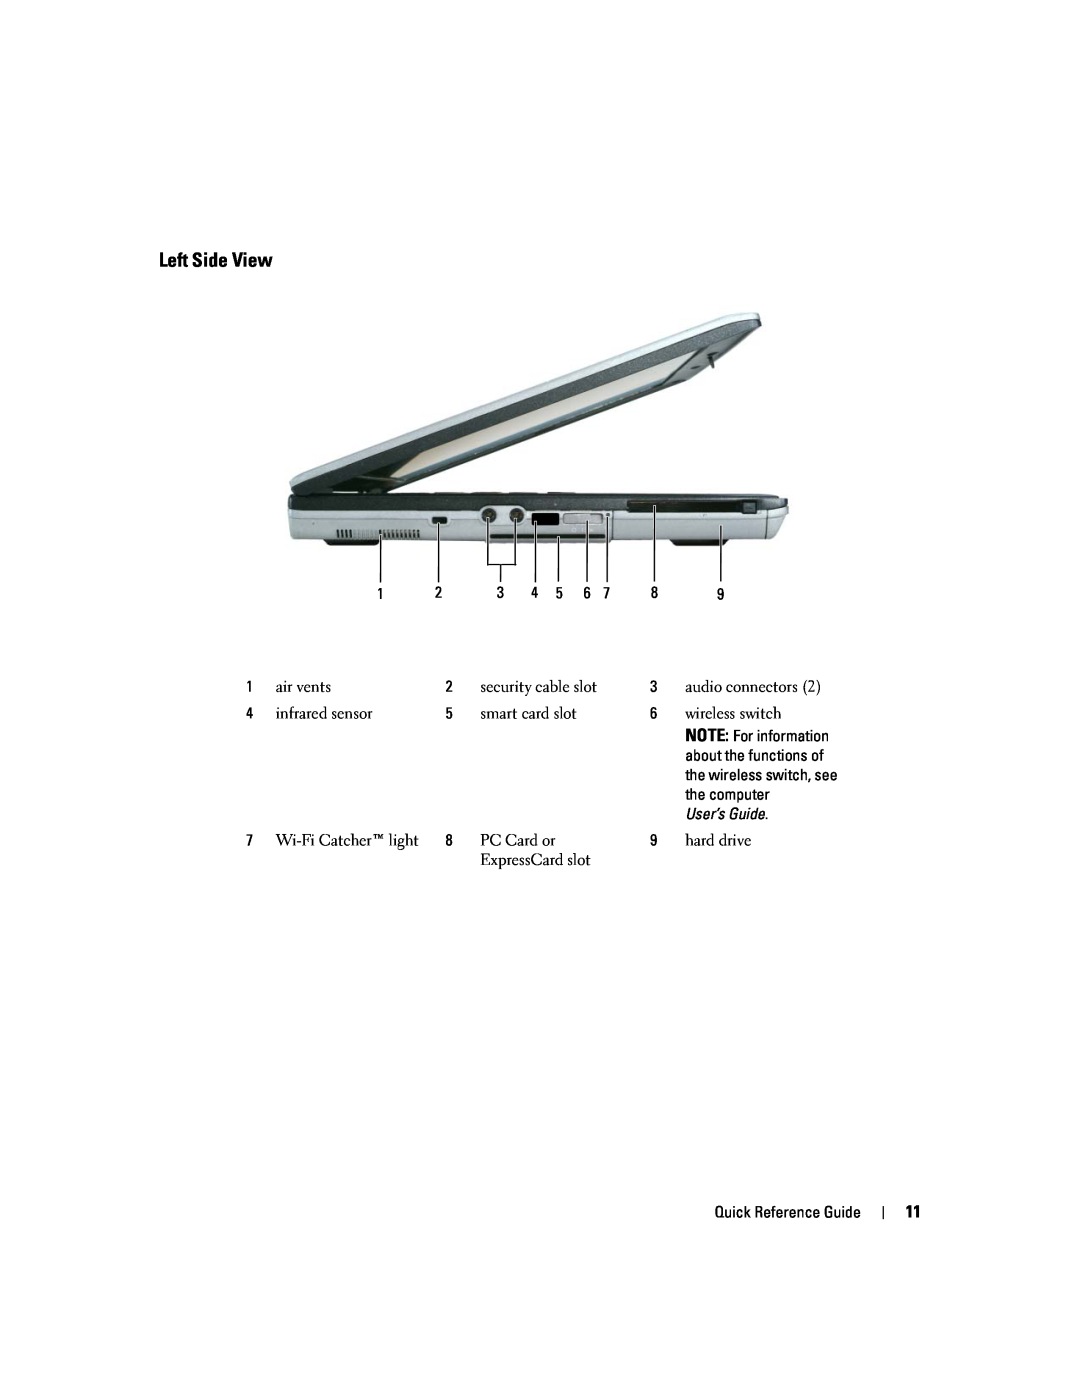 Dell D620 manual Left Side View, User’s Guide 